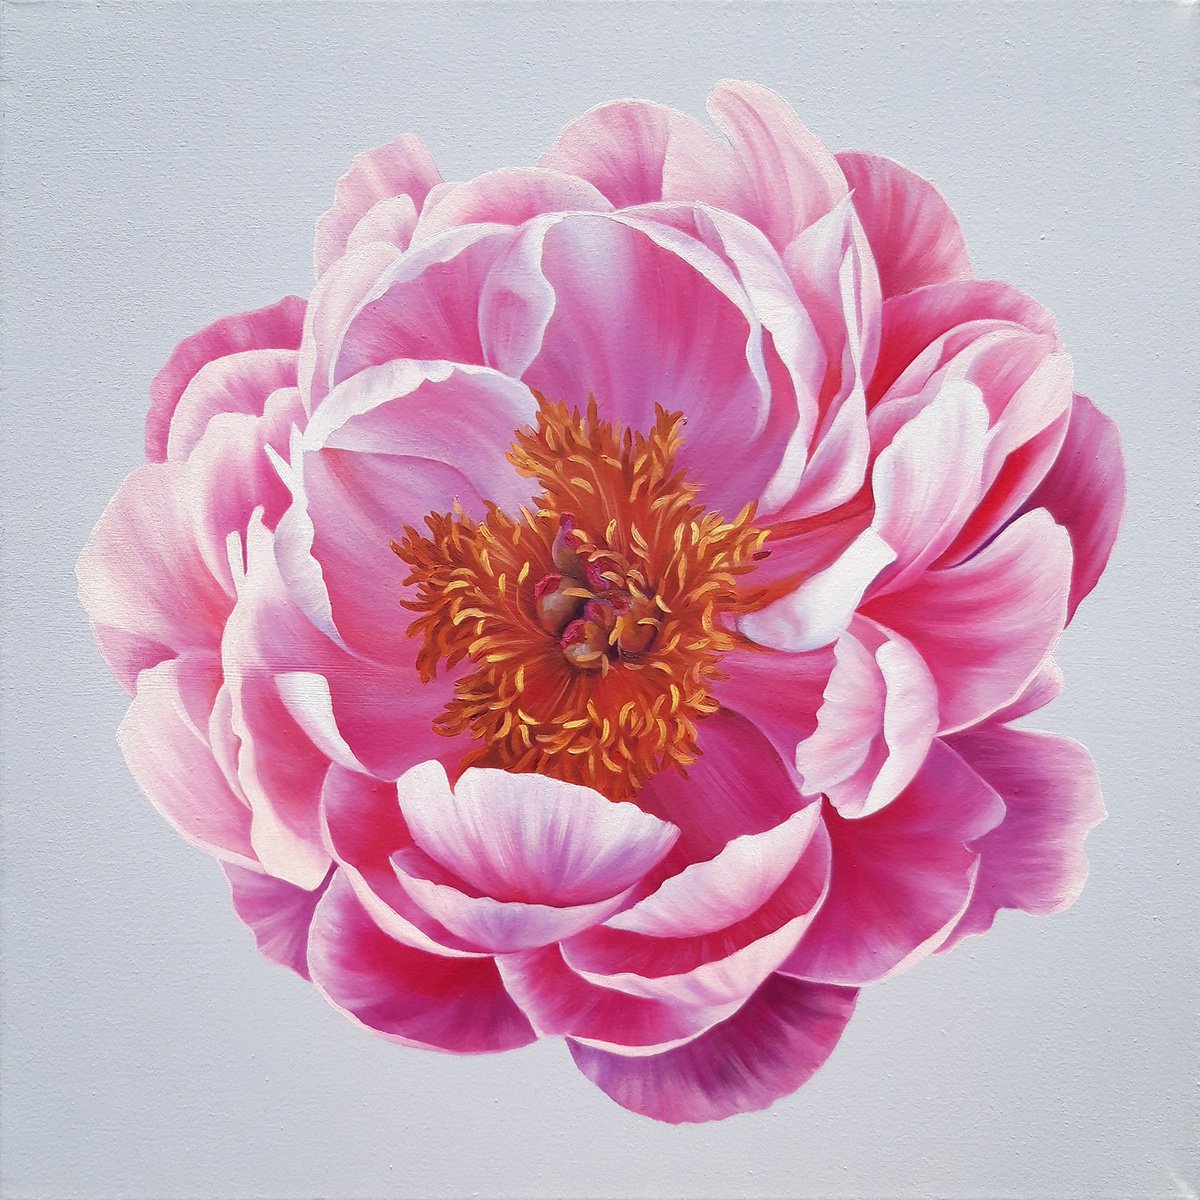 Coral charm peony, oil floral painting, minimalism flowers art by Anna Steshenko